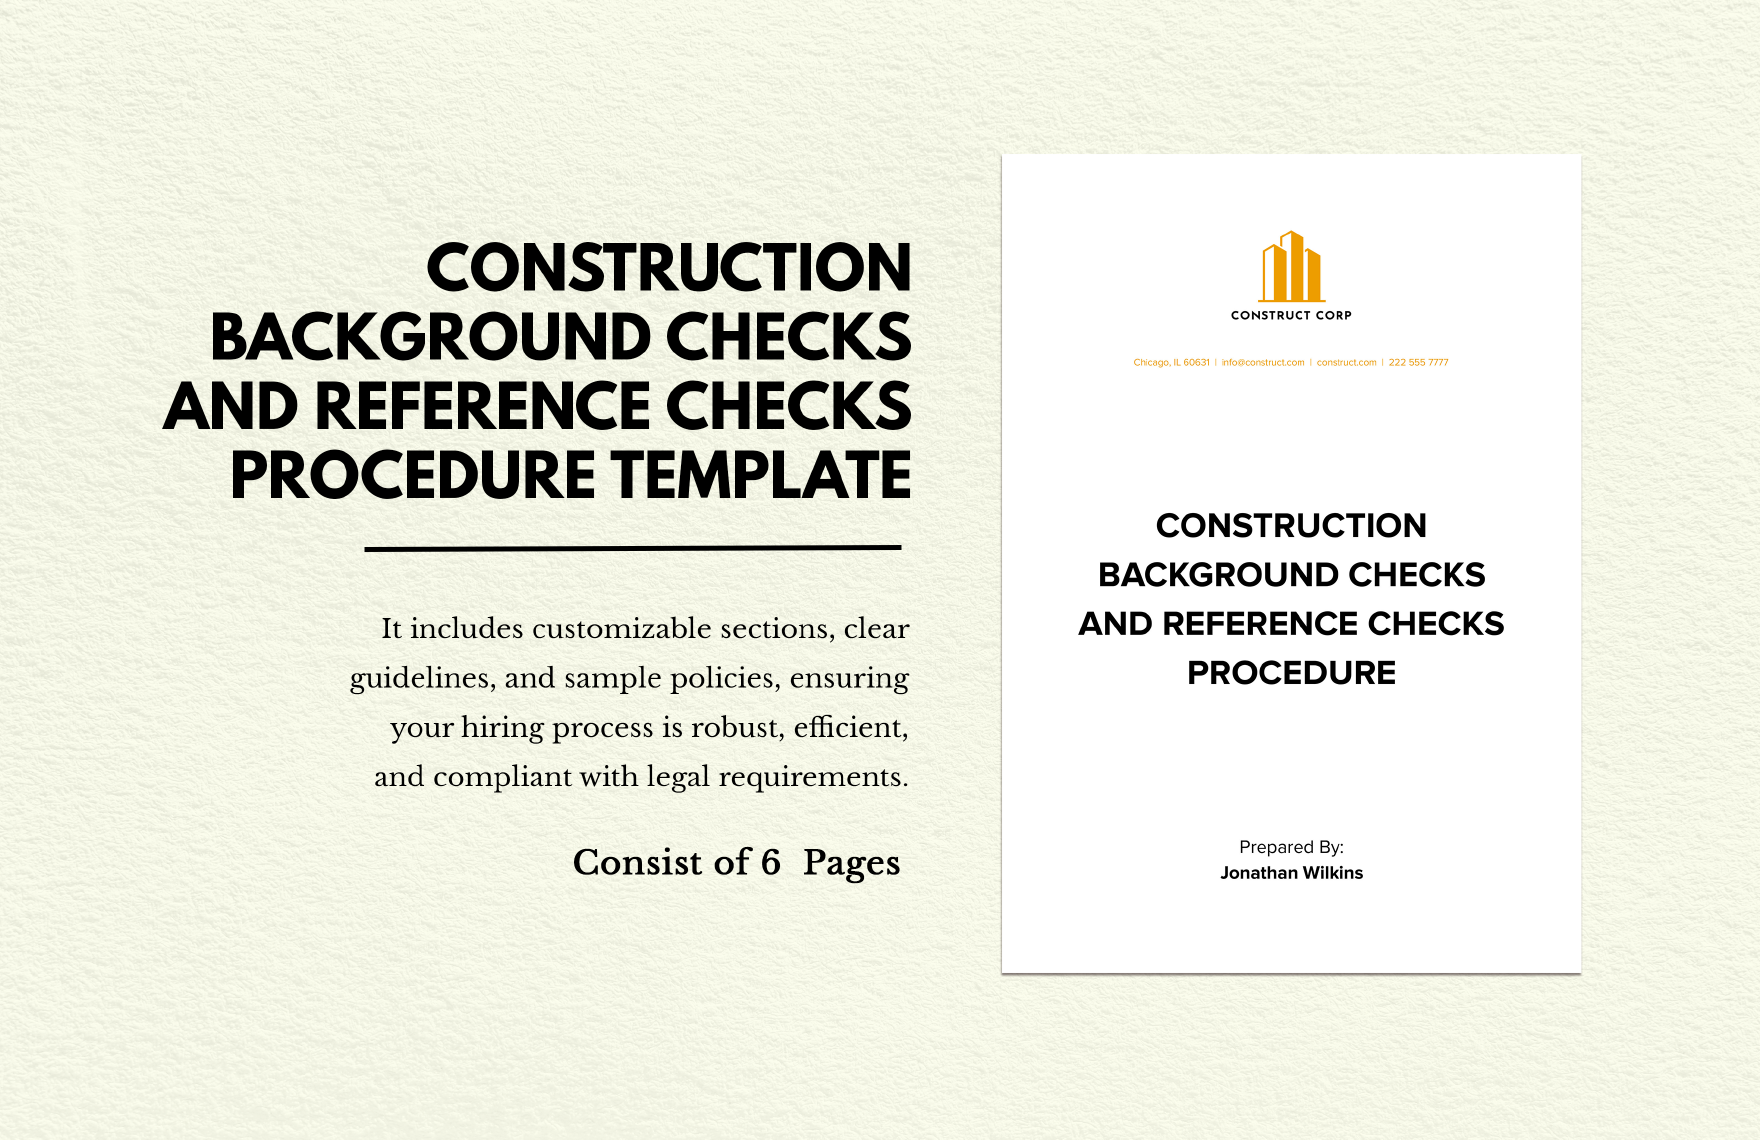 Construction Background Checks and Reference Checks Procedure  in Word, Google Docs